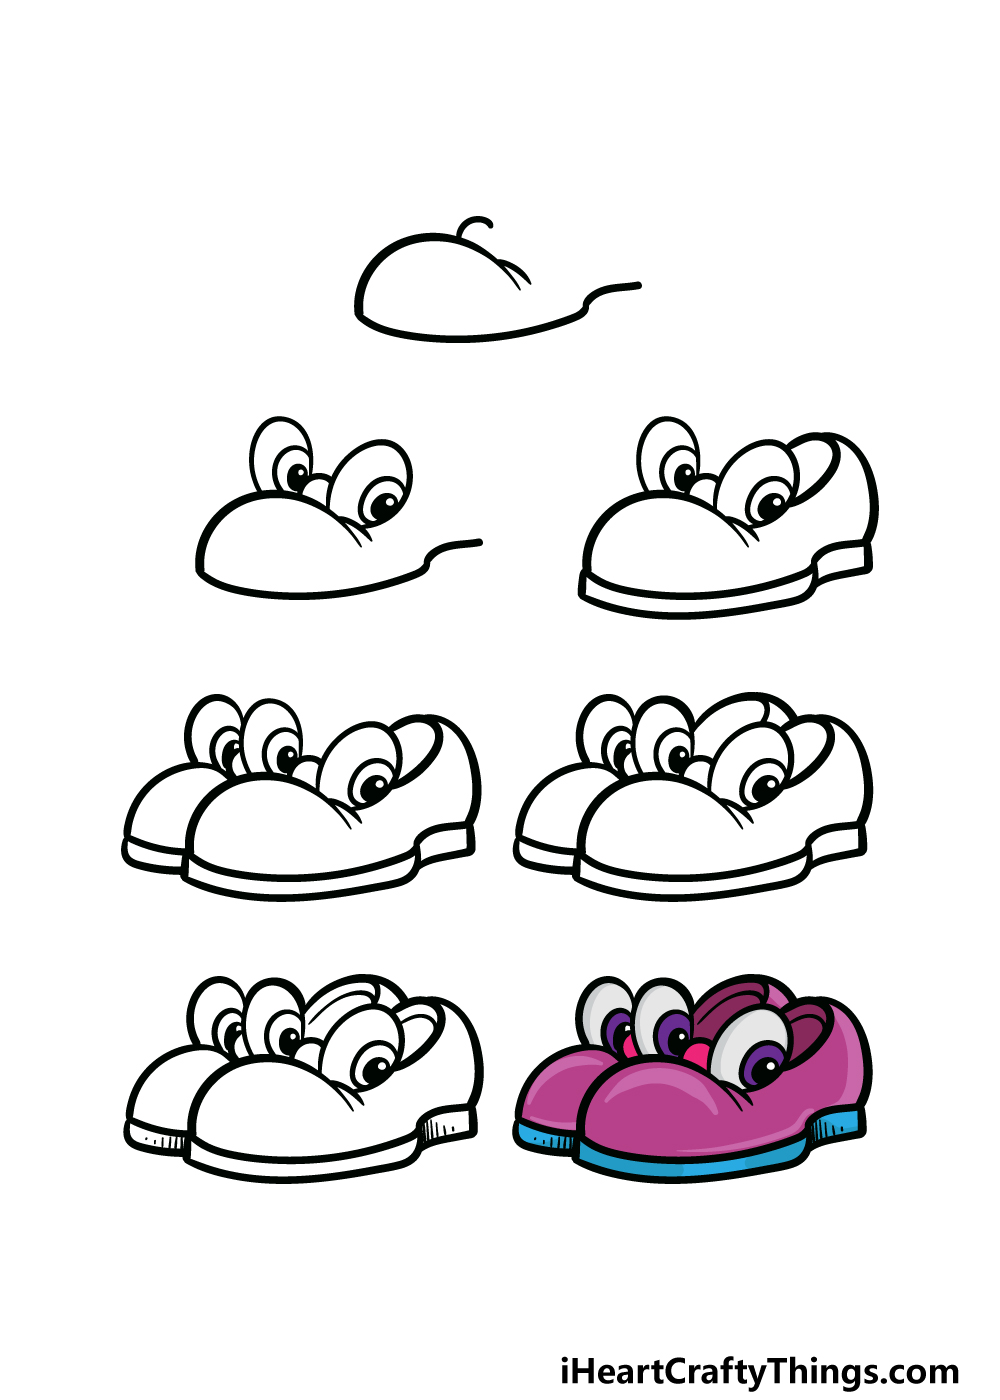 how to draw cartoon shoes in 7 steps